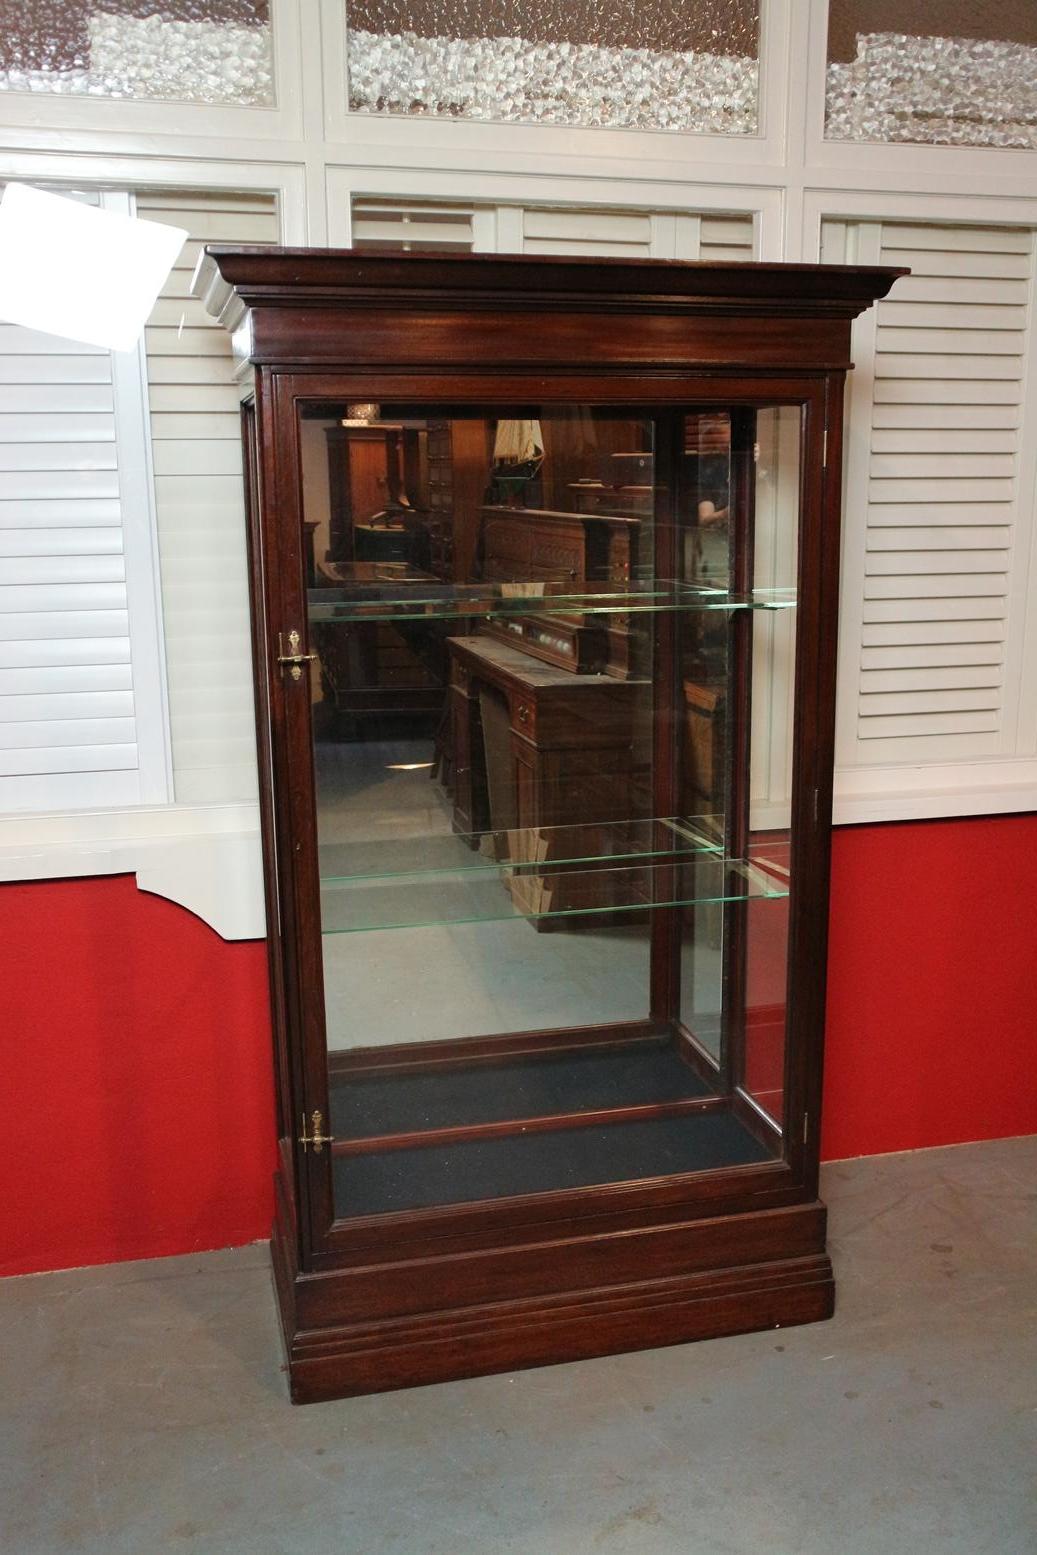 Beautiful antique mahogany display with 2 adjustable glass shelves. The back has a mirror. In perfect state.
Origin: England
Period: circa 1890-1900
Size: W 95 cm (108 cm), D 40 cm, H 183 cm.